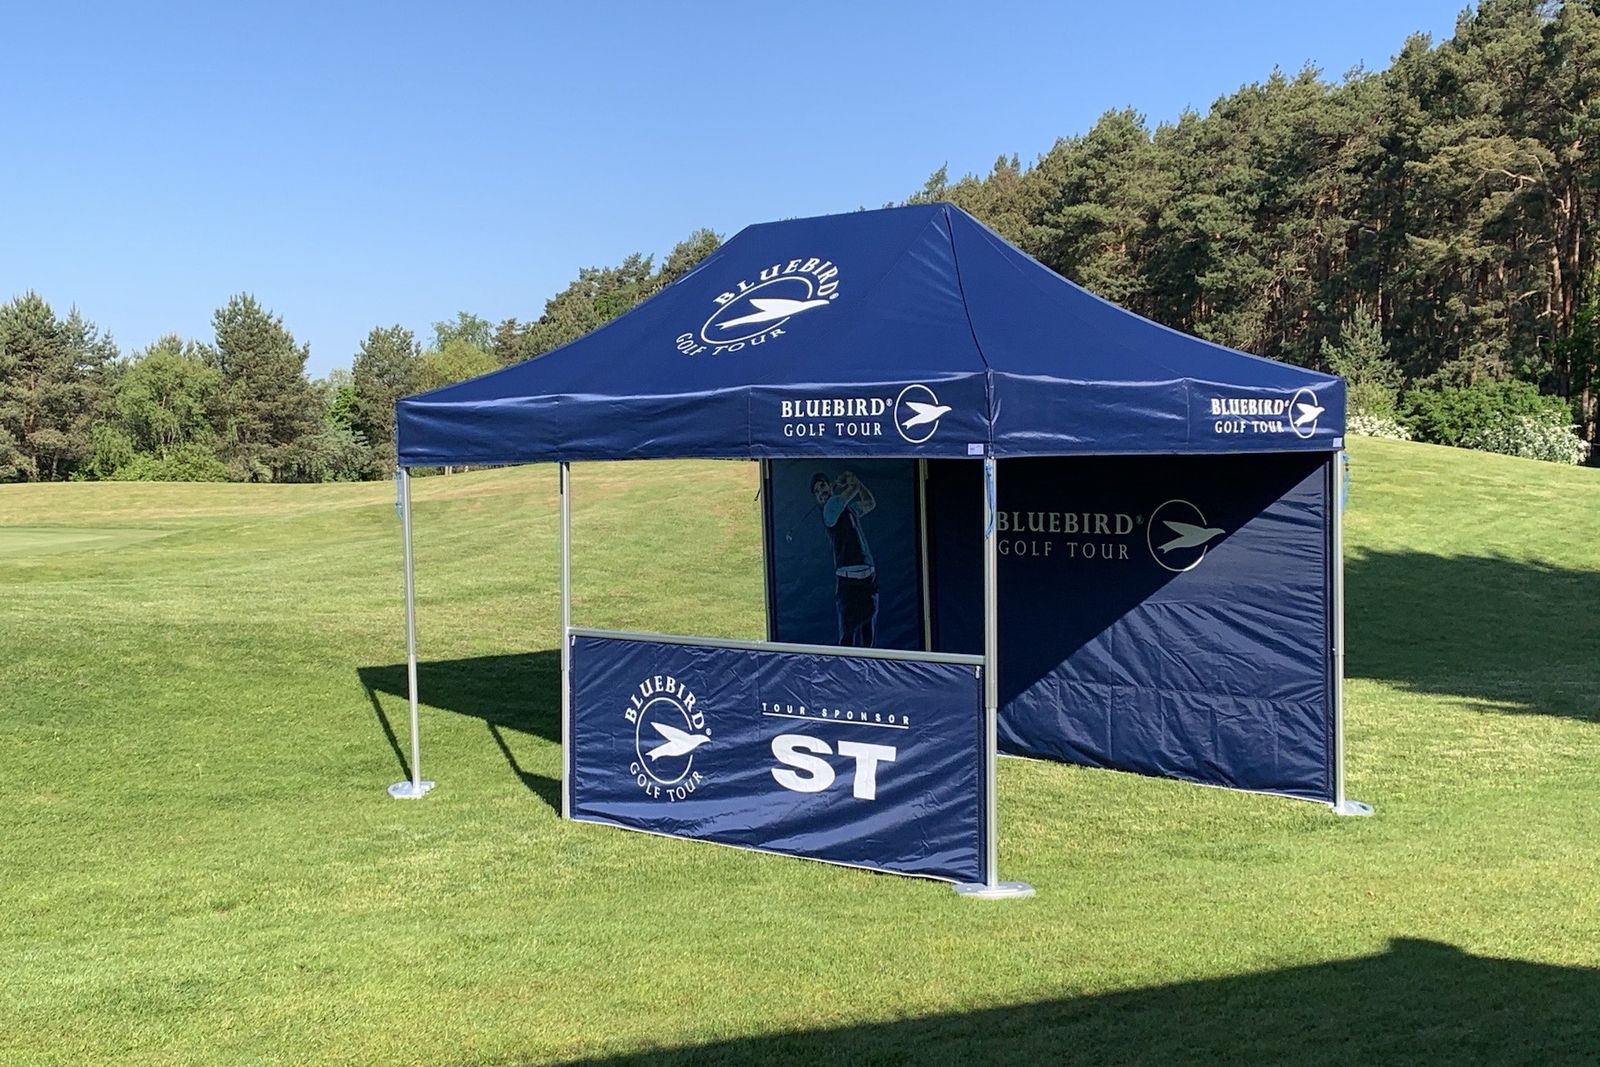 The blue Pro-Tent 5000 from FairwaySports on the grass.